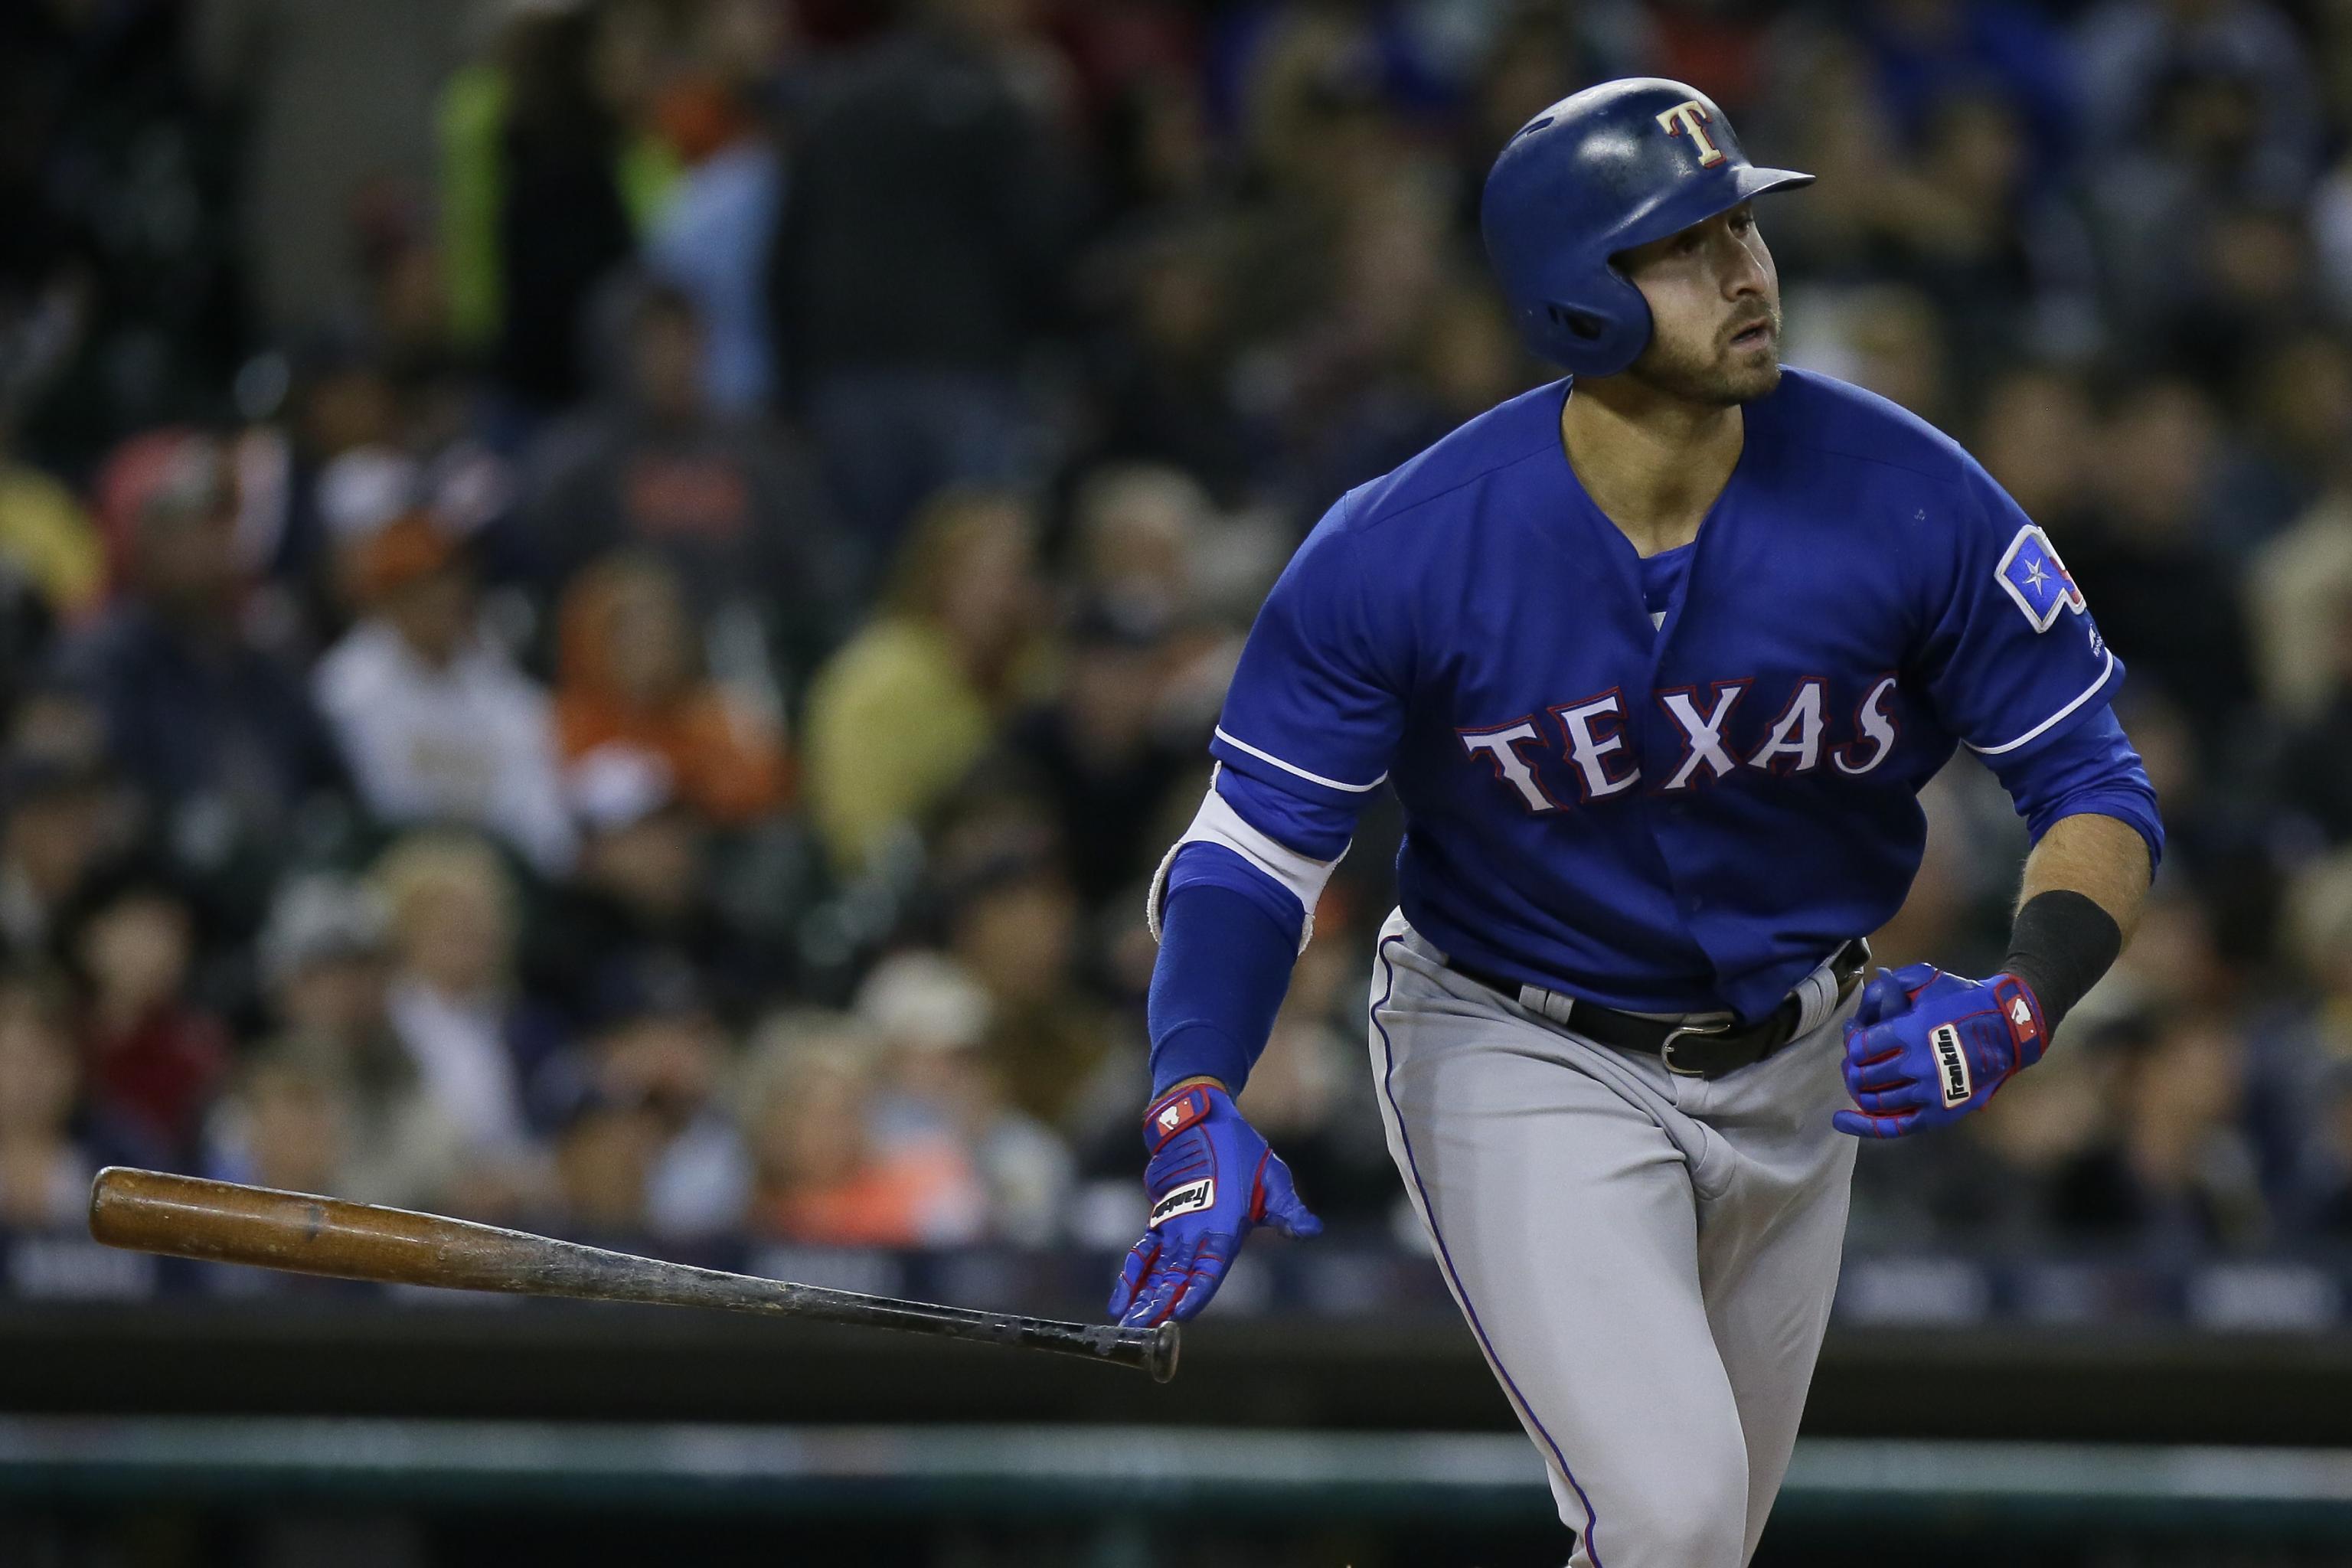 HIGHLIGHTS: Joey Gallo With a Massive Throw for the Double Play